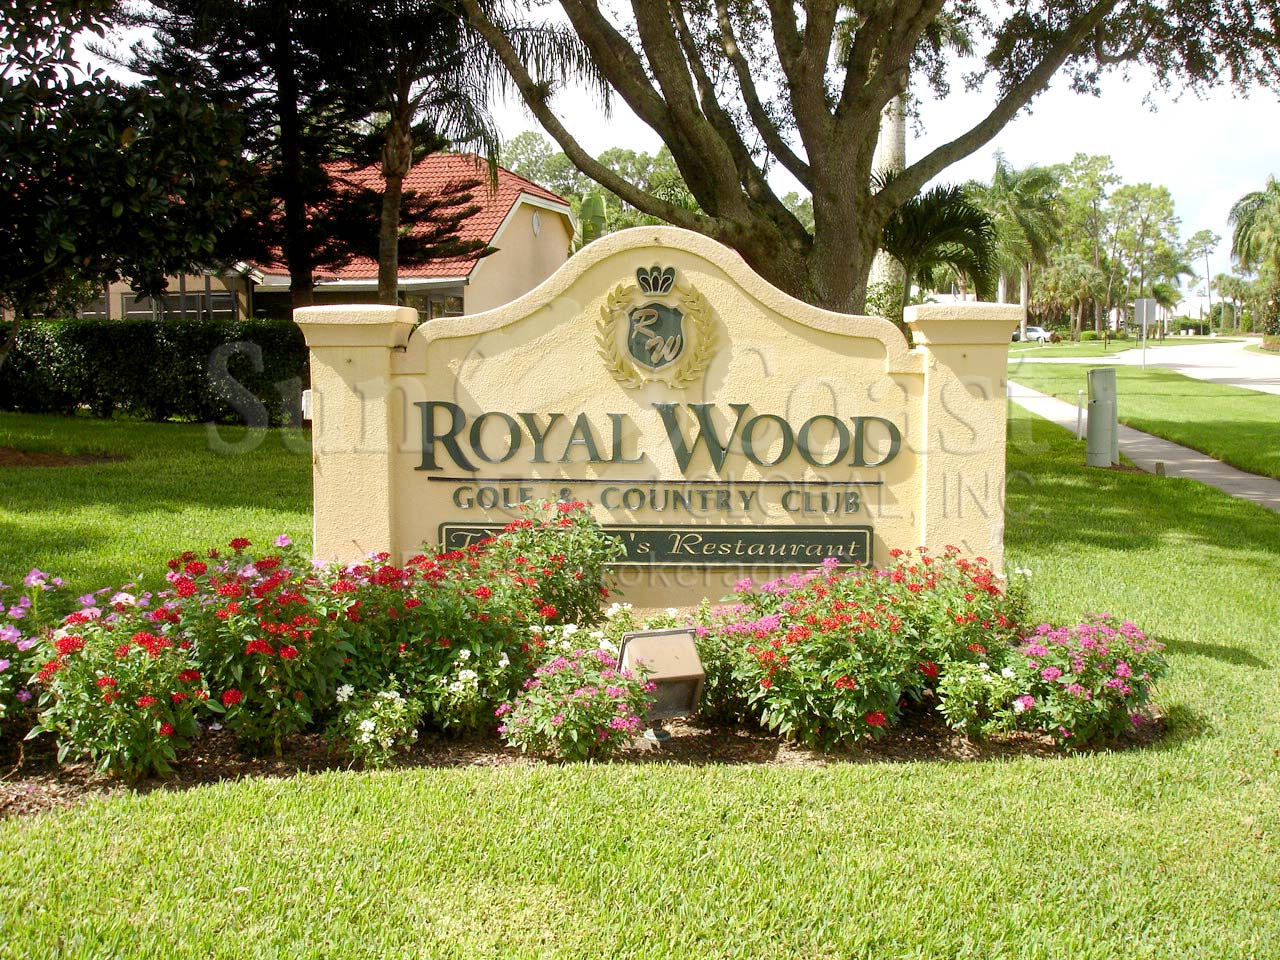 ROYAL WOOD Golf and Country Club